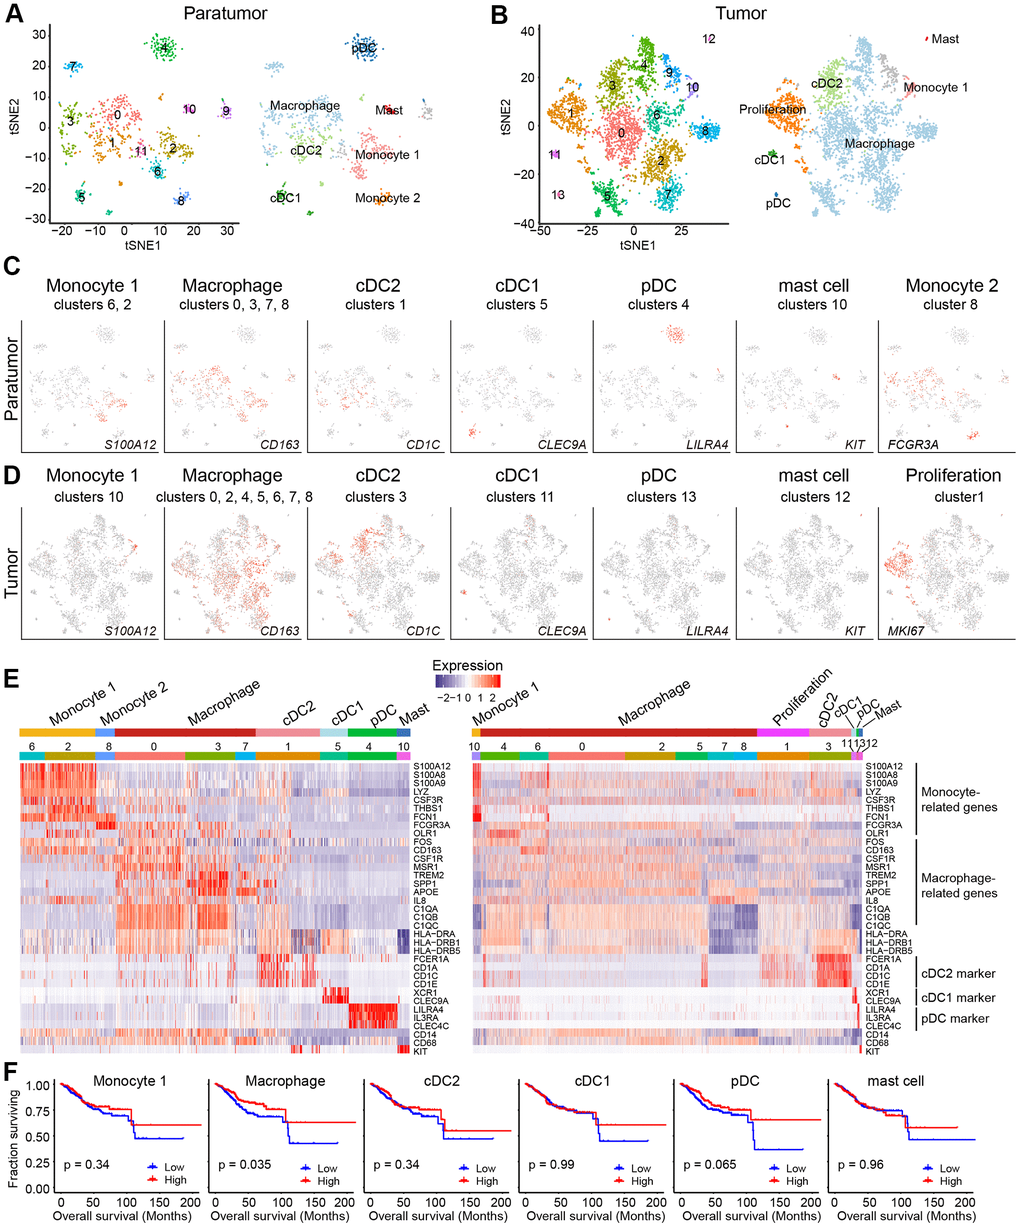 Myeloid cell clusters in paratumors and endometrial tumors. (A, B) t-SNE plot of 936 myeloid cells in Paratumor (A) and 4,152 myeloid cells in Tumor (B), color-coded by their associated cluster (left) or the assigned subtype (right). (C, D) t-SNE plot, color-coded for relative expression (lowest expression to highest expression, gray to red) of marker genes for the myeloid subtypes in Paratumor (C) and Tumor (D). (E) Heatmaps created using known gene expression profiles of myeloid cells in Paratumor (left panel) and Tumor (right panel). The identity of each cluster was assigned using known markers. (F) The overall survival curves based on TCGA-UCEC data (n = 549 patients), stratified for the average expression (binary: high versus low) of tumor myeloid cell marker genes.